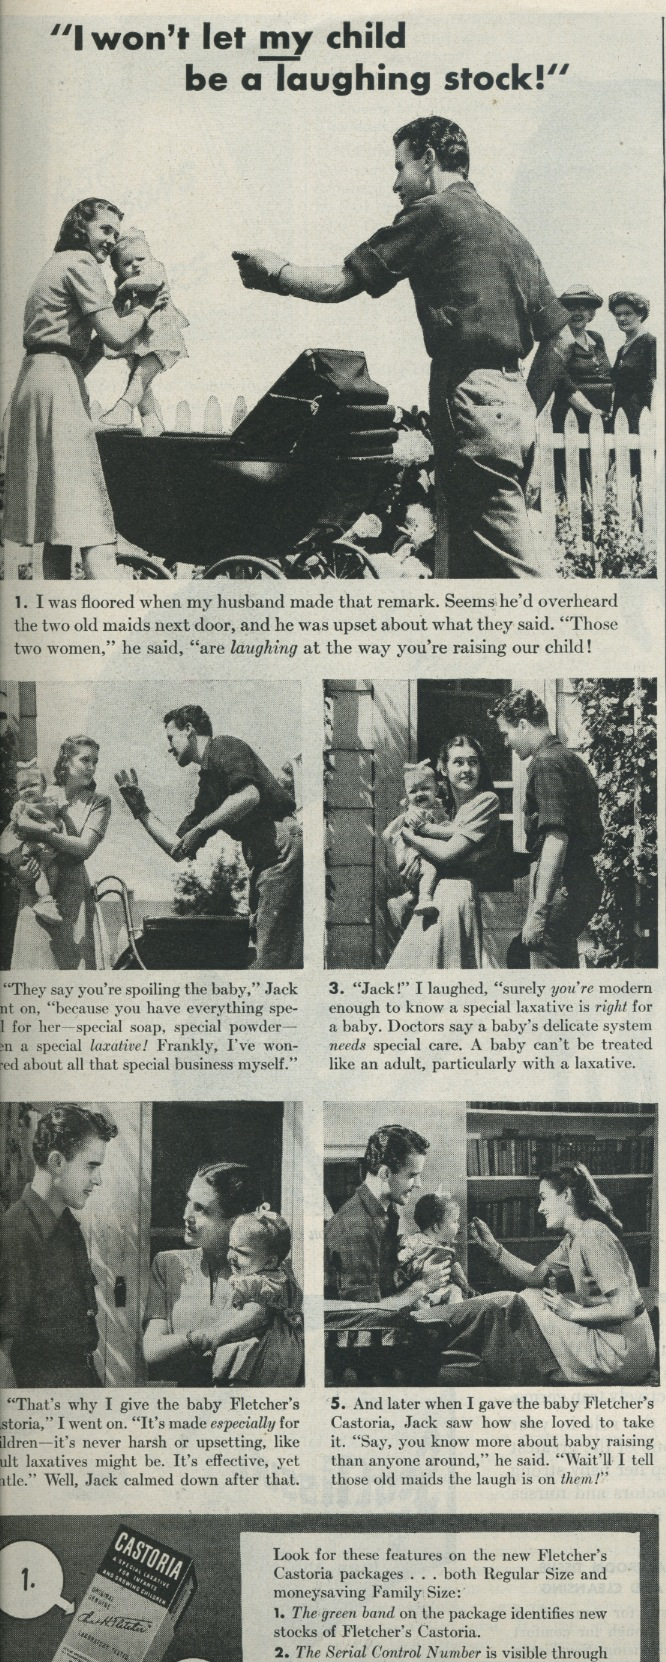 a magazine article features pictures and text on the page